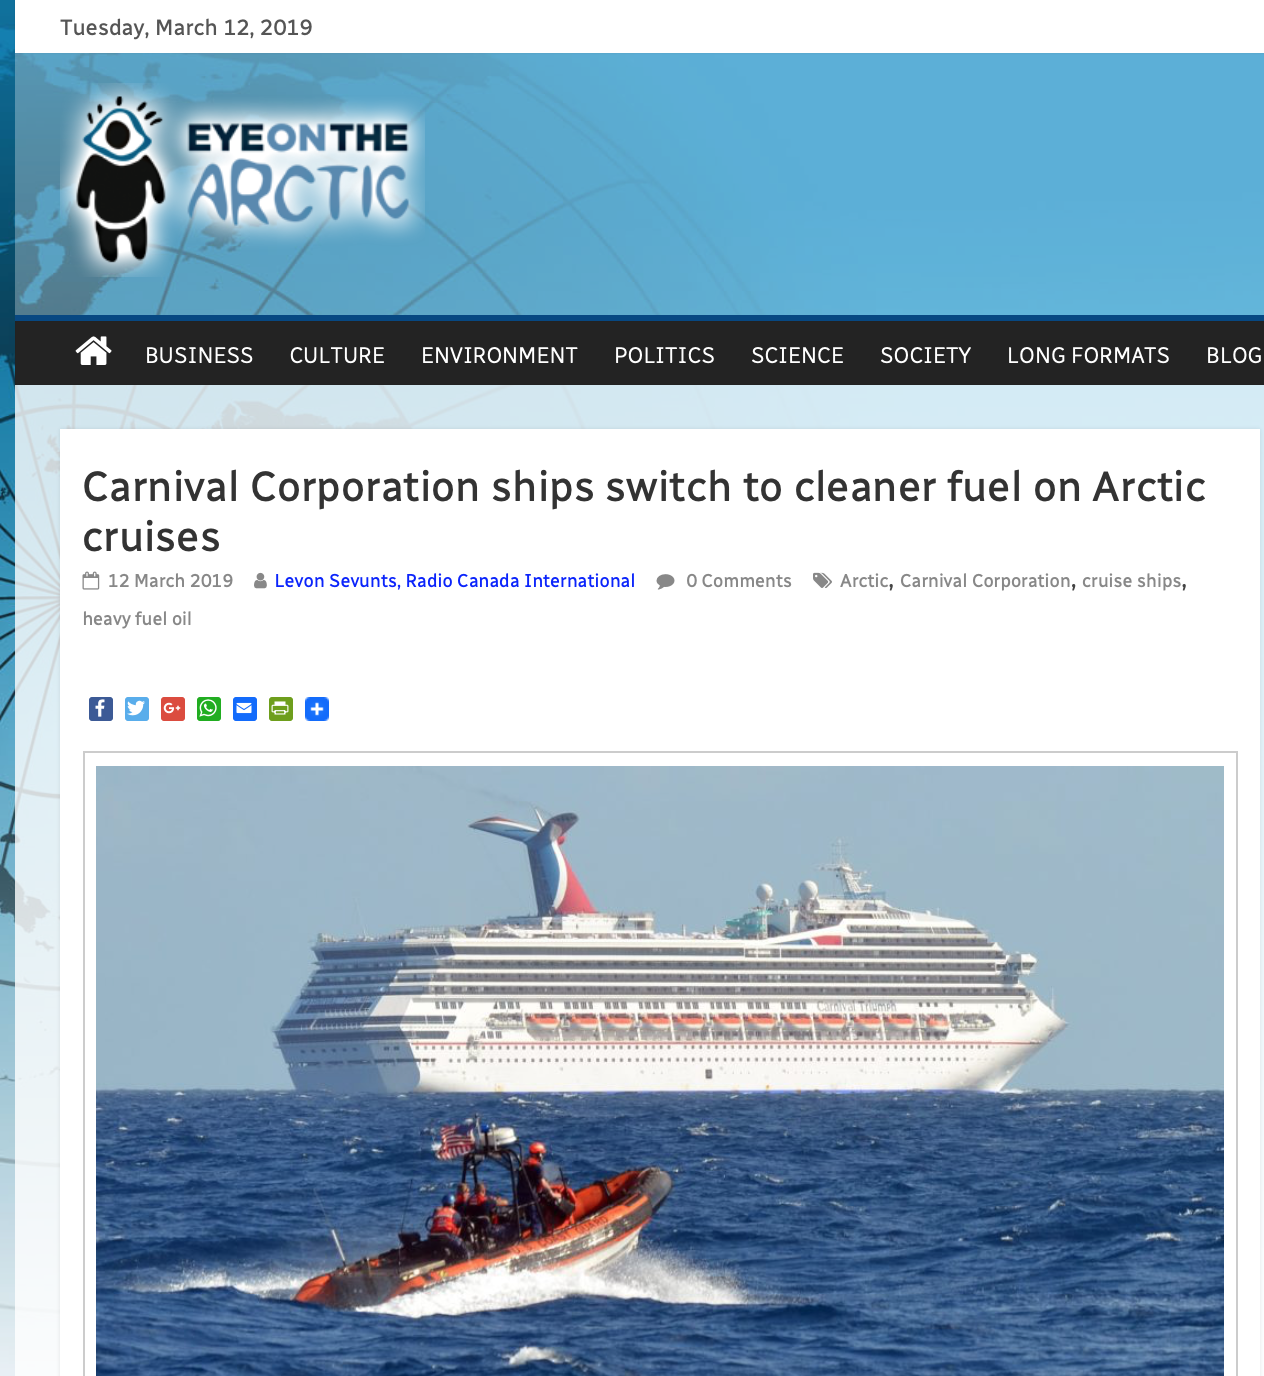 Carnival Corporation ships switch to cleaner fuel on Arctic cruises